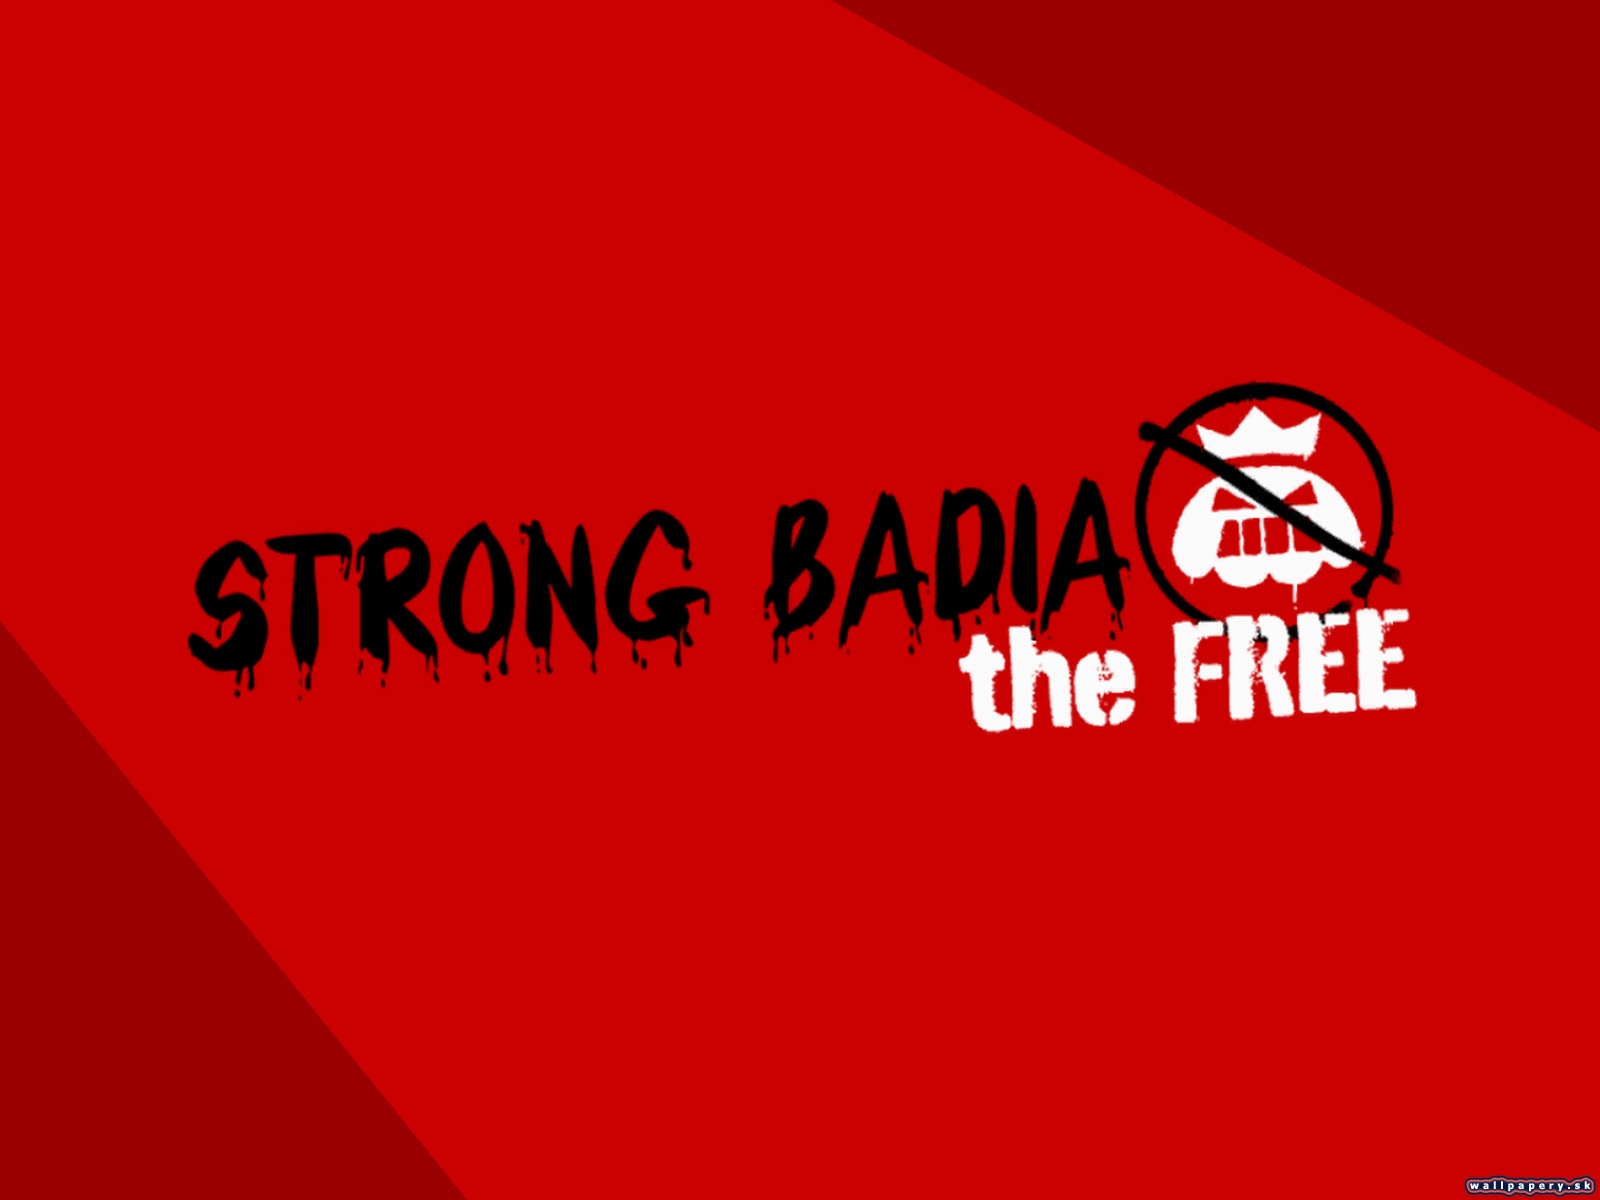 Strong Bad's Episode 2: Strong Badia the Free - wallpaper 3